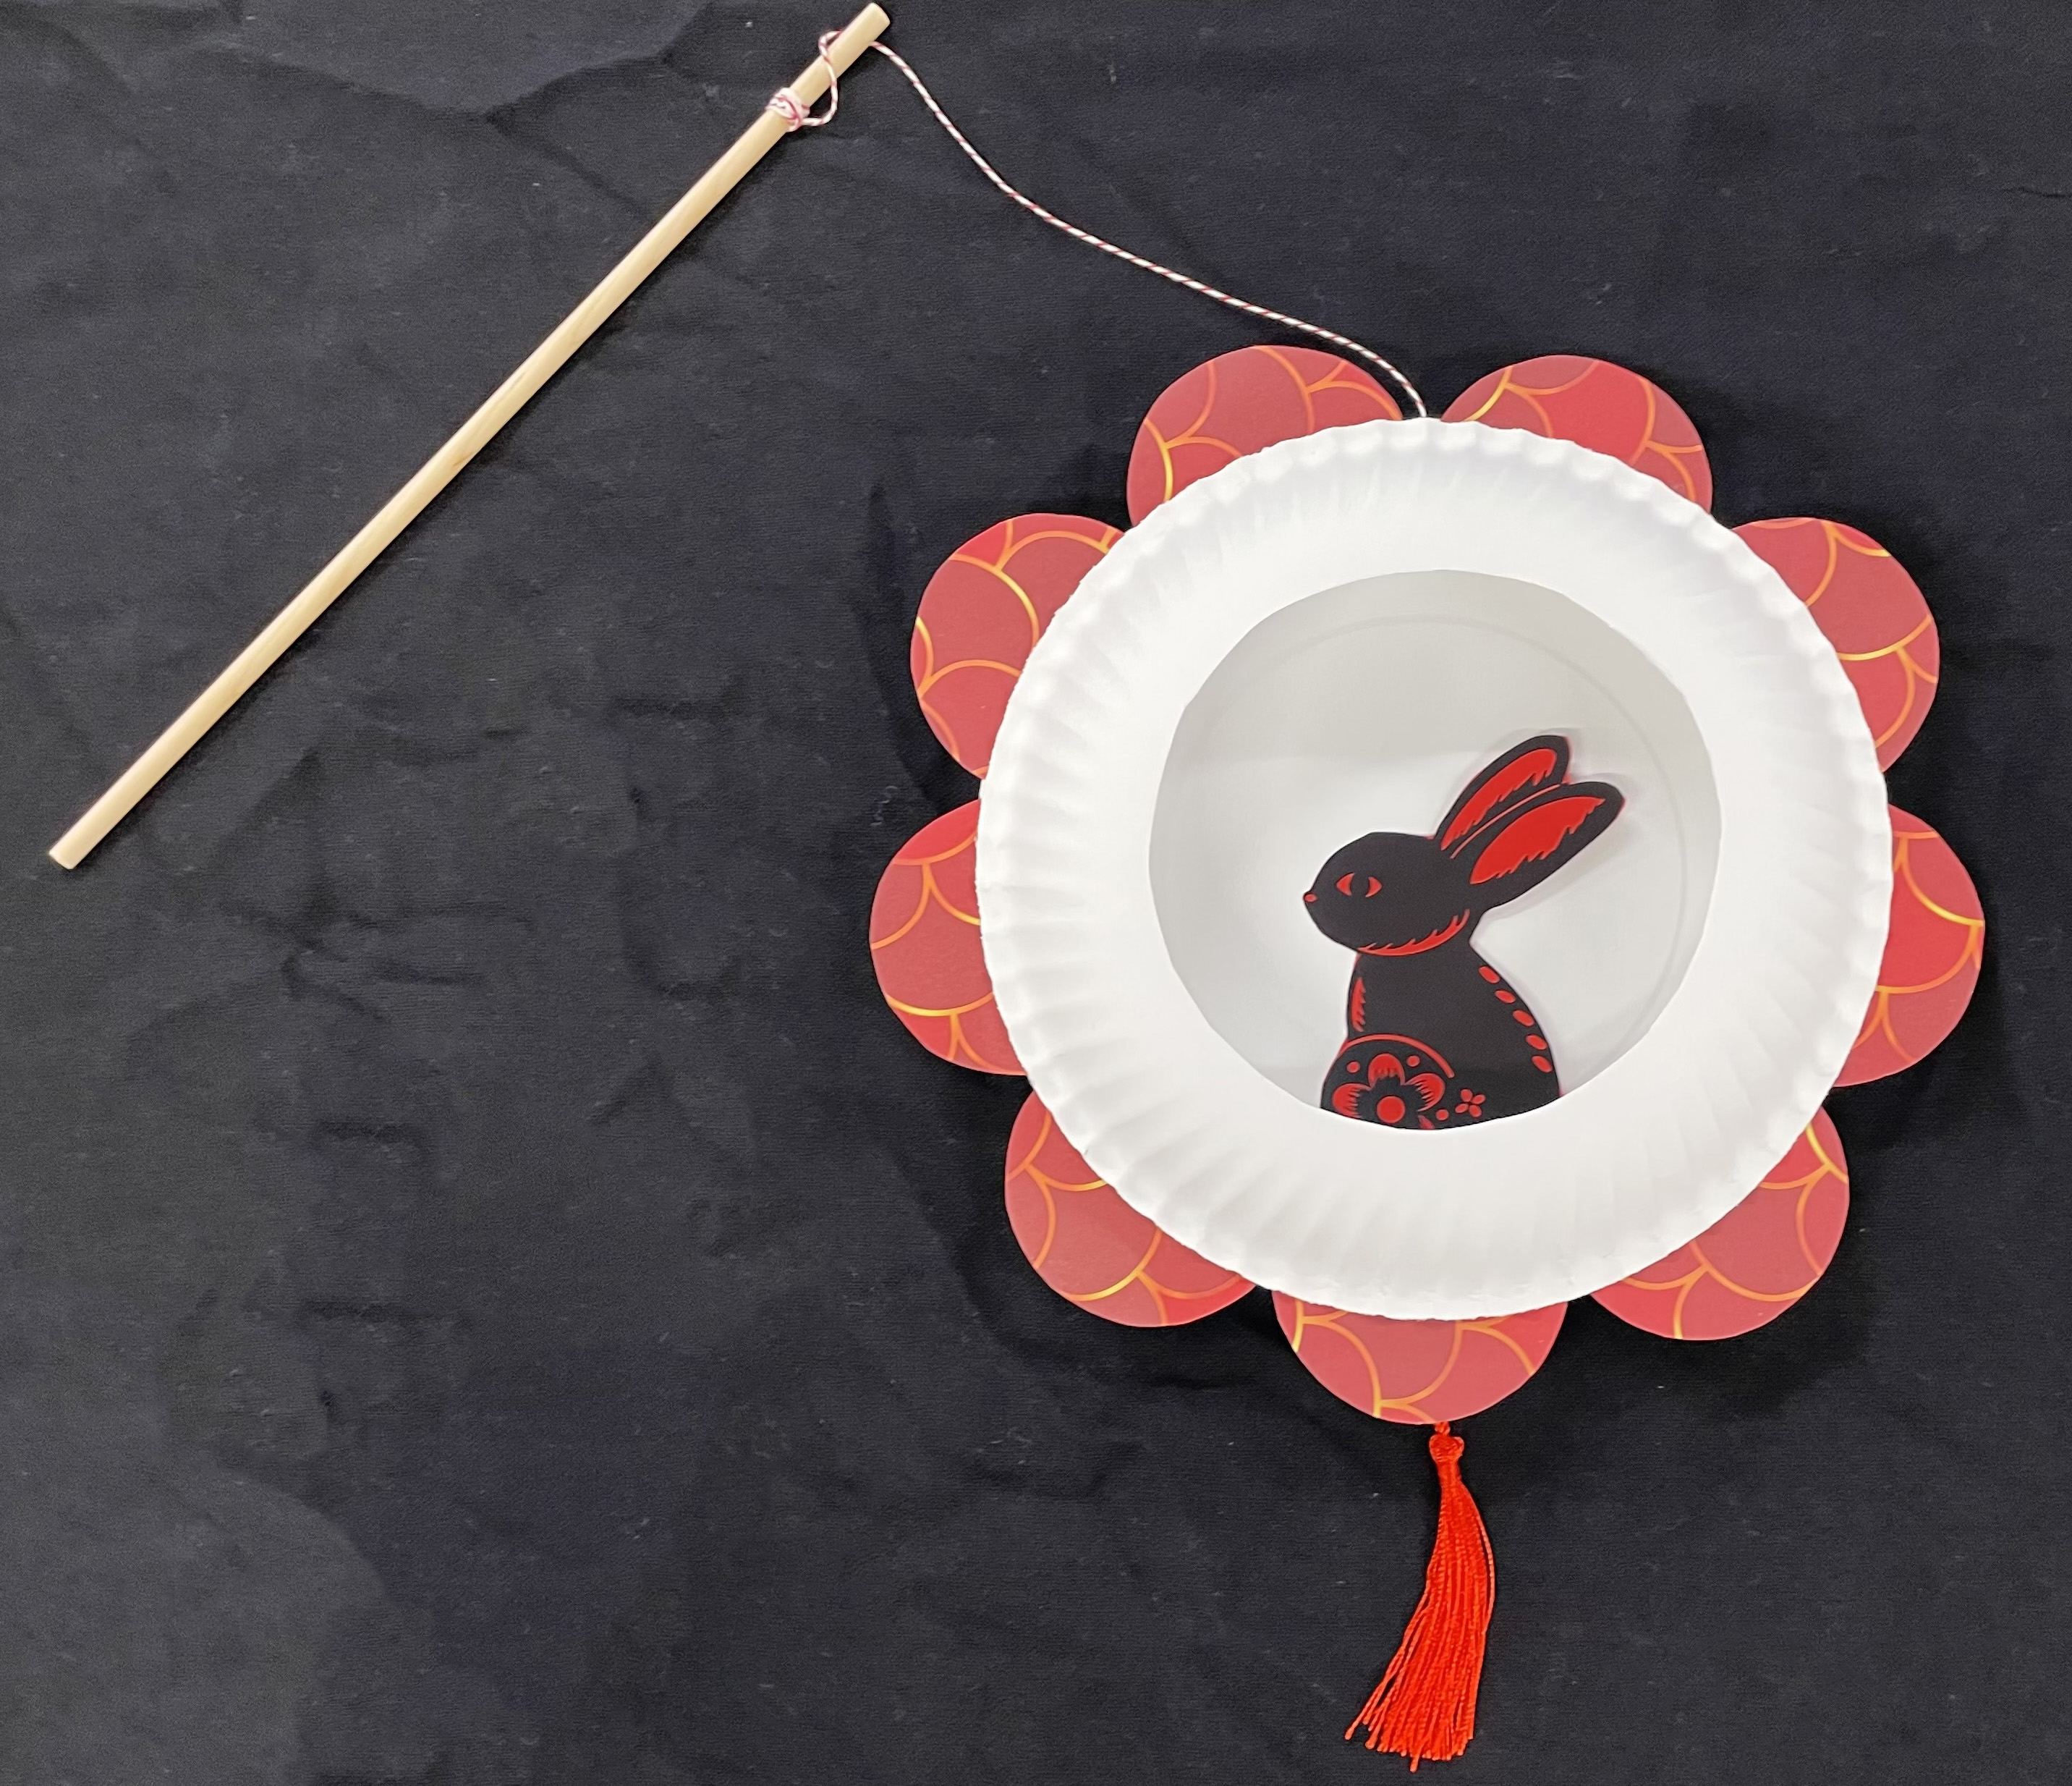 A paper rabbit inside a paper plate frame, decorated with red petals and a red tassle